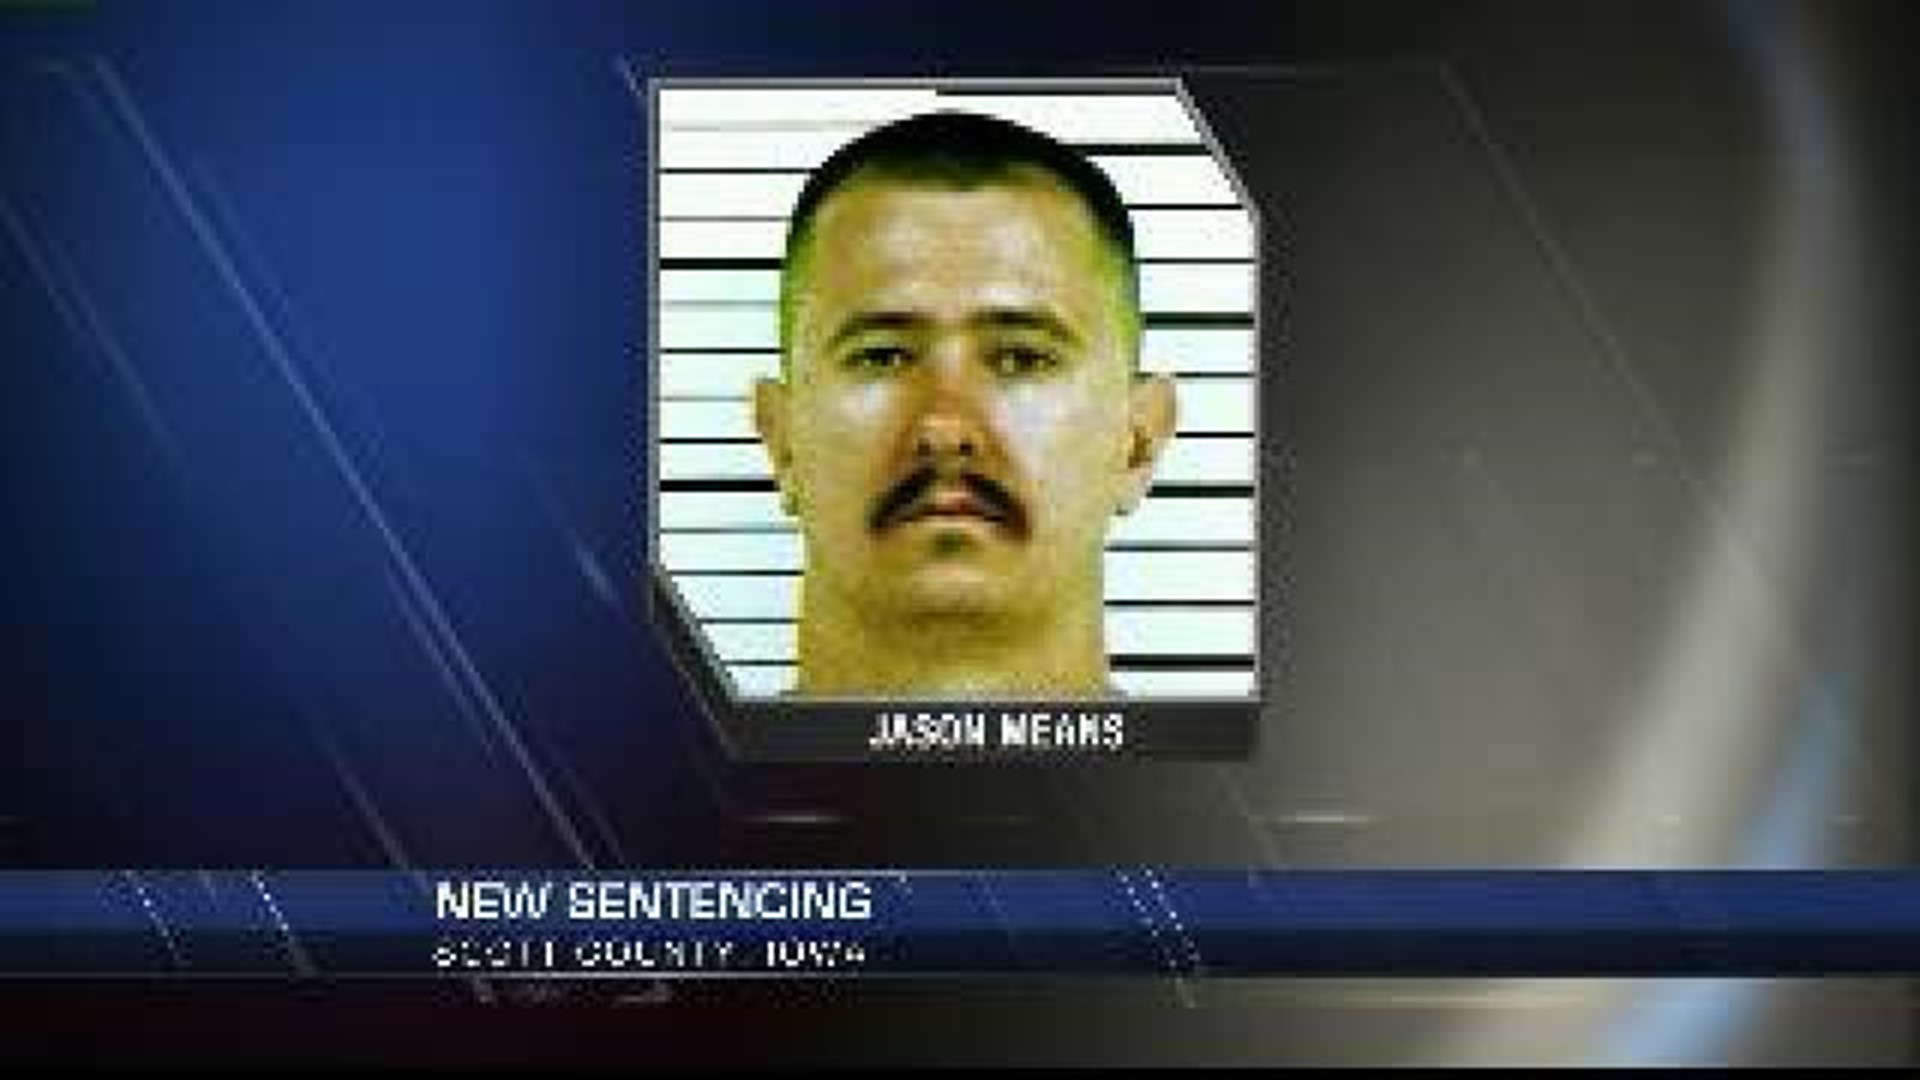 Man convicted for murder as juvenile could get revised sentence